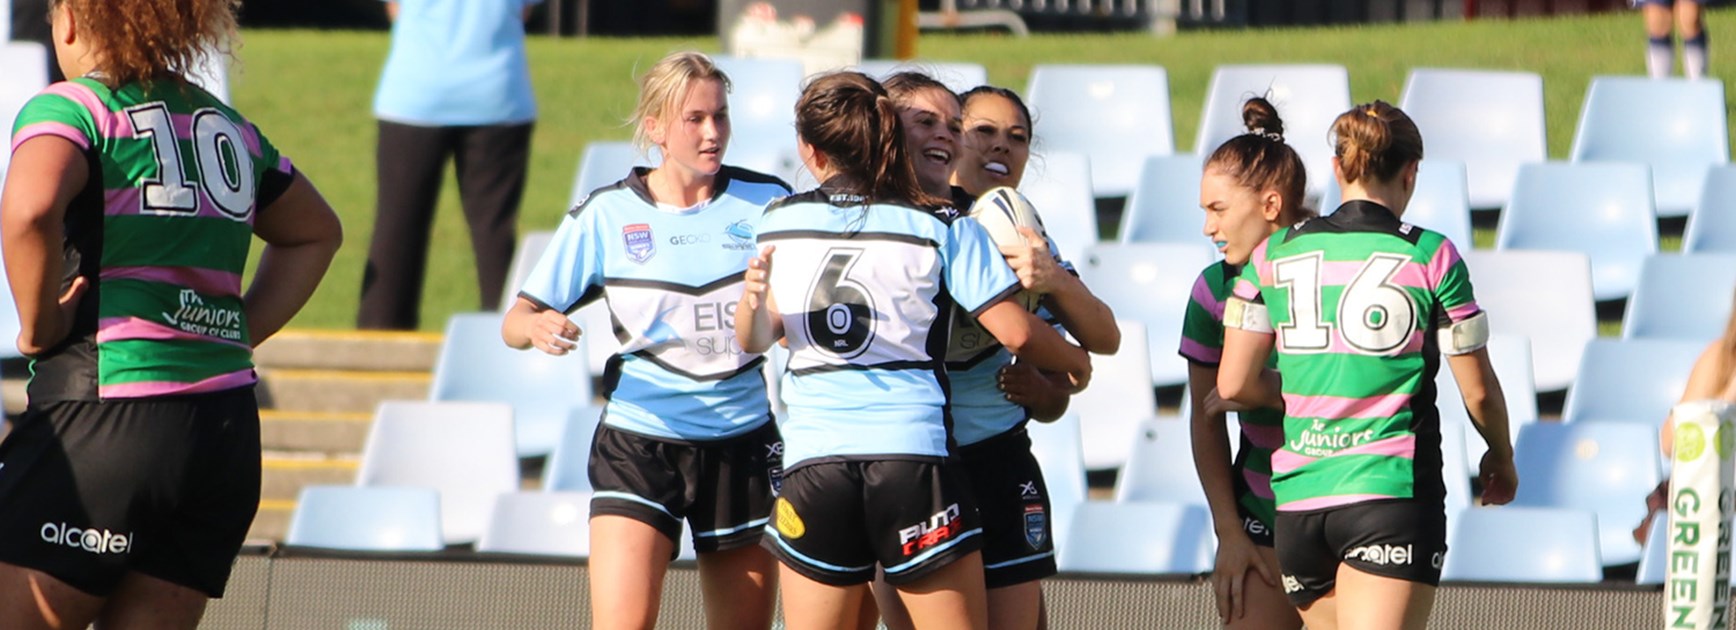 Sizzling first half sparks Sharks women's victory